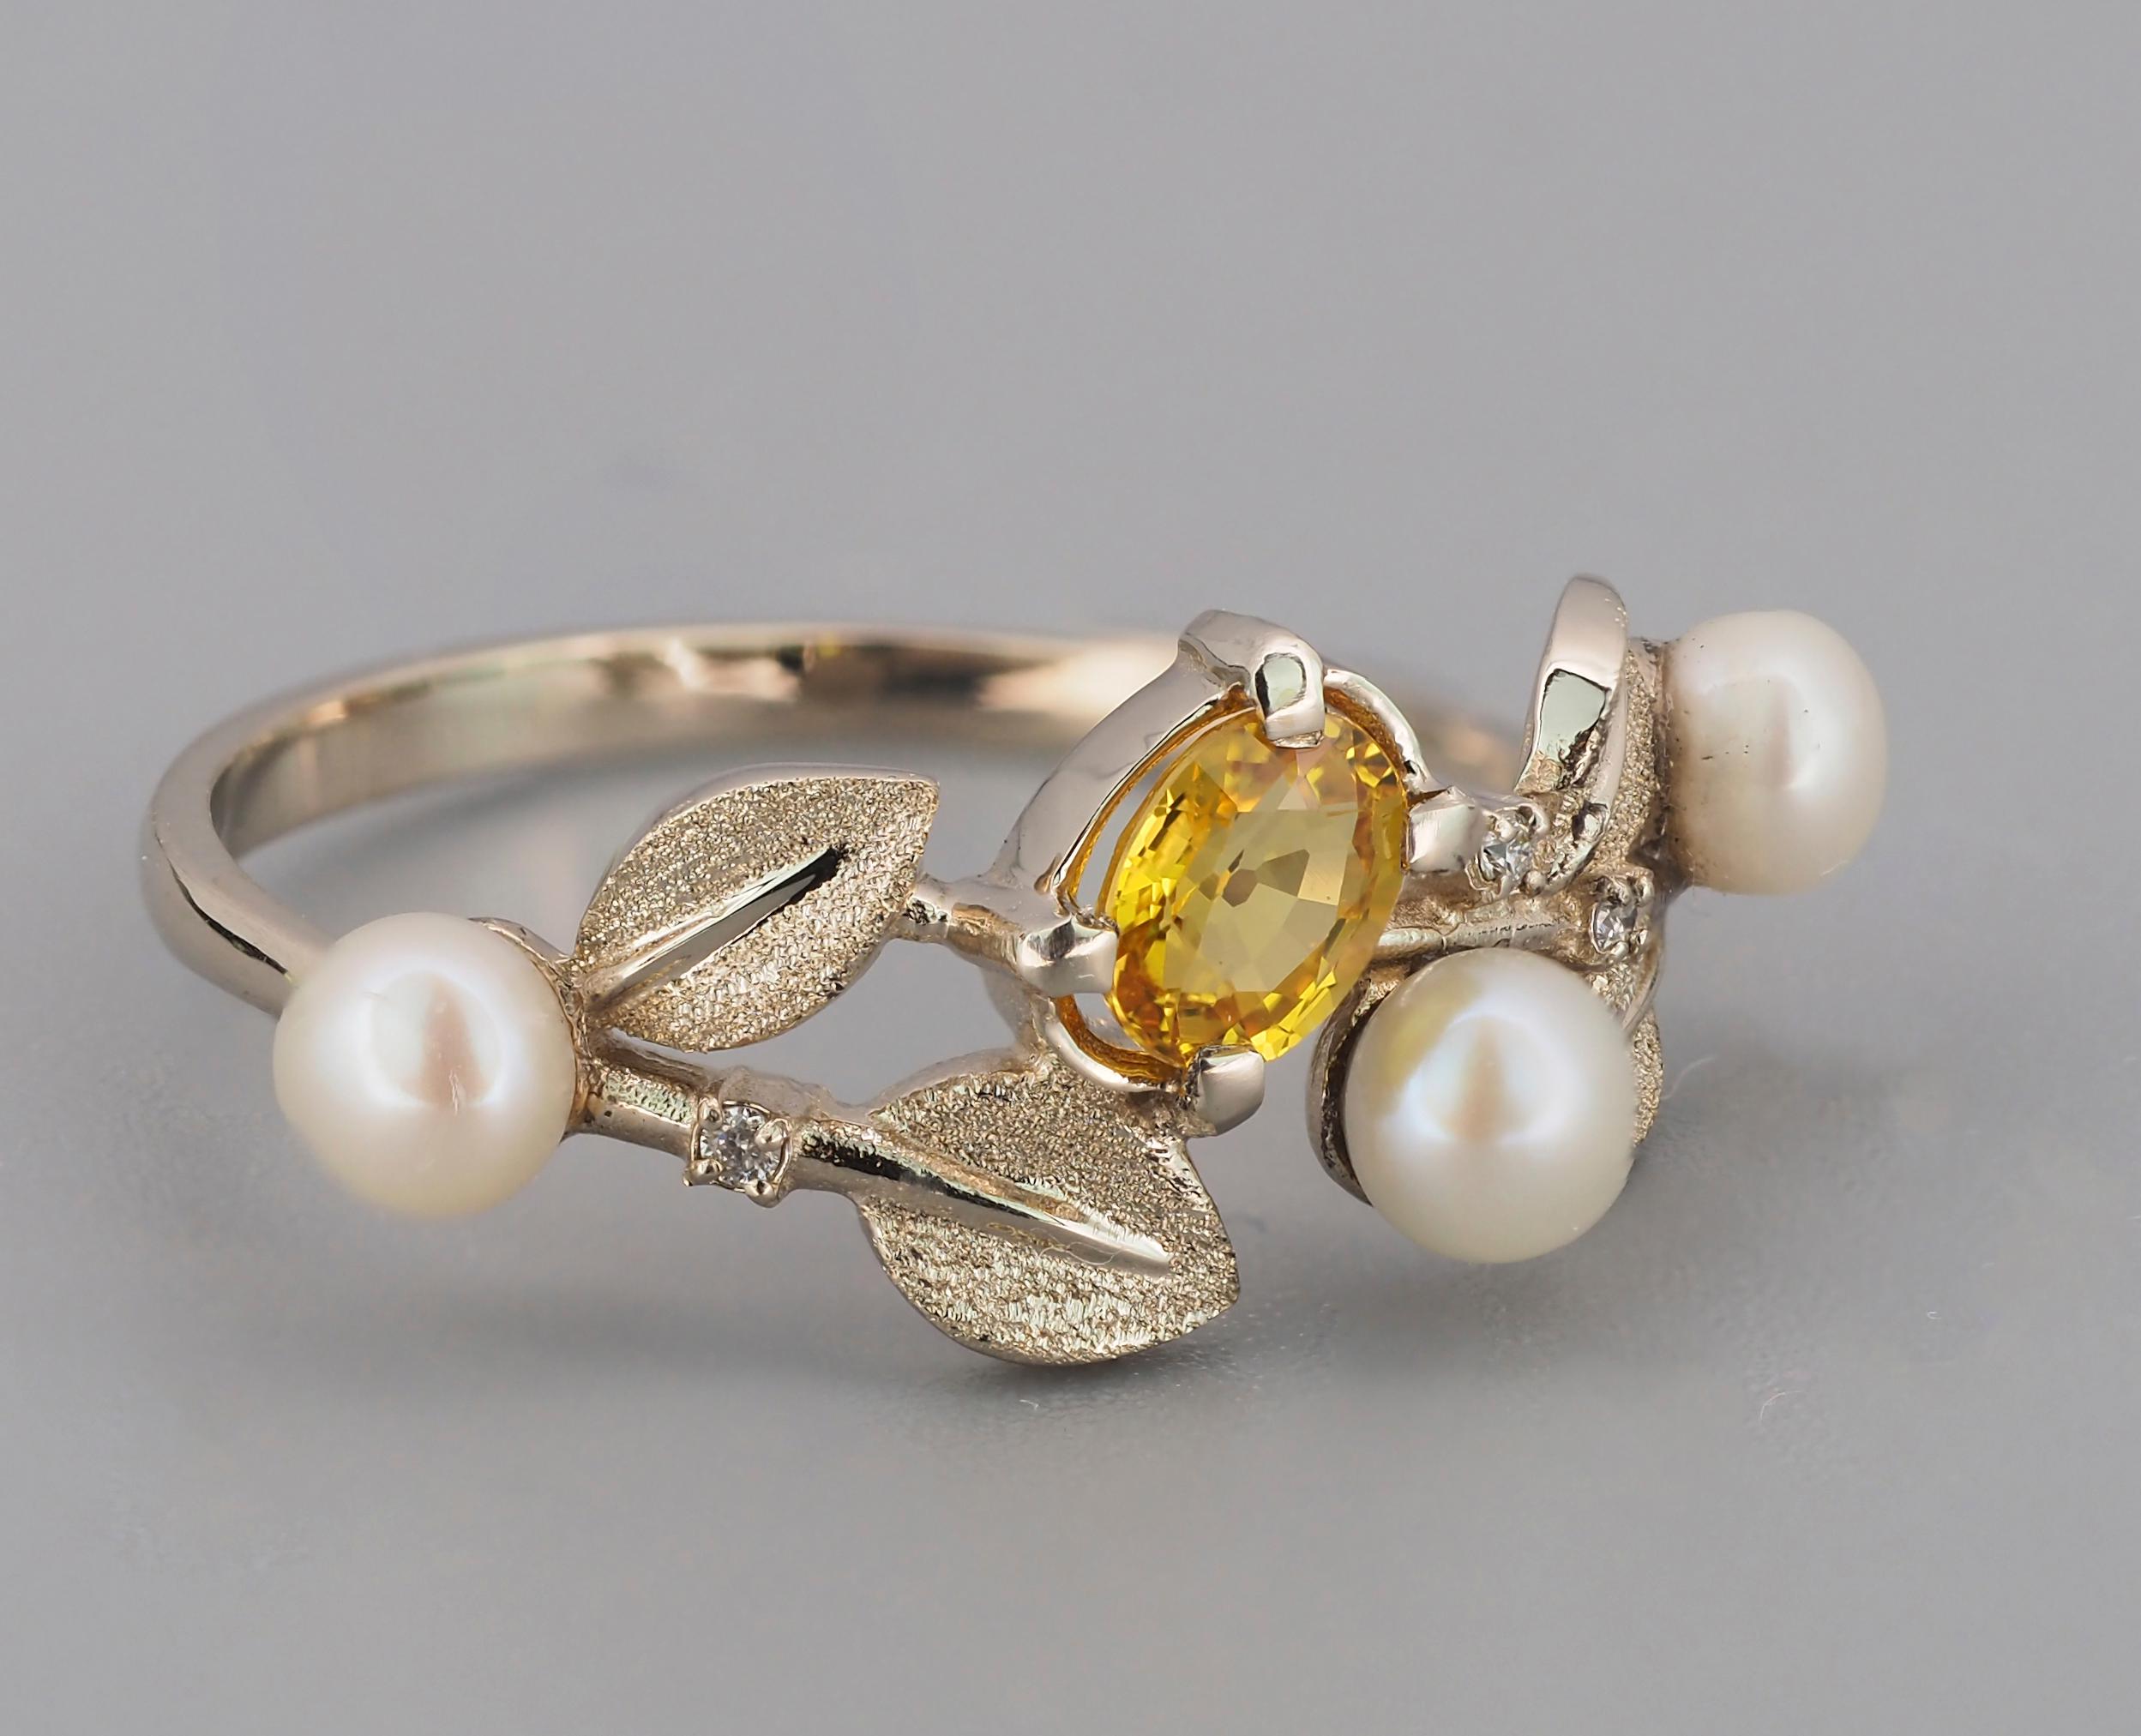 For Sale:  14k Gold Floral Ring with Sapphire, Diamonds and Pearls 3